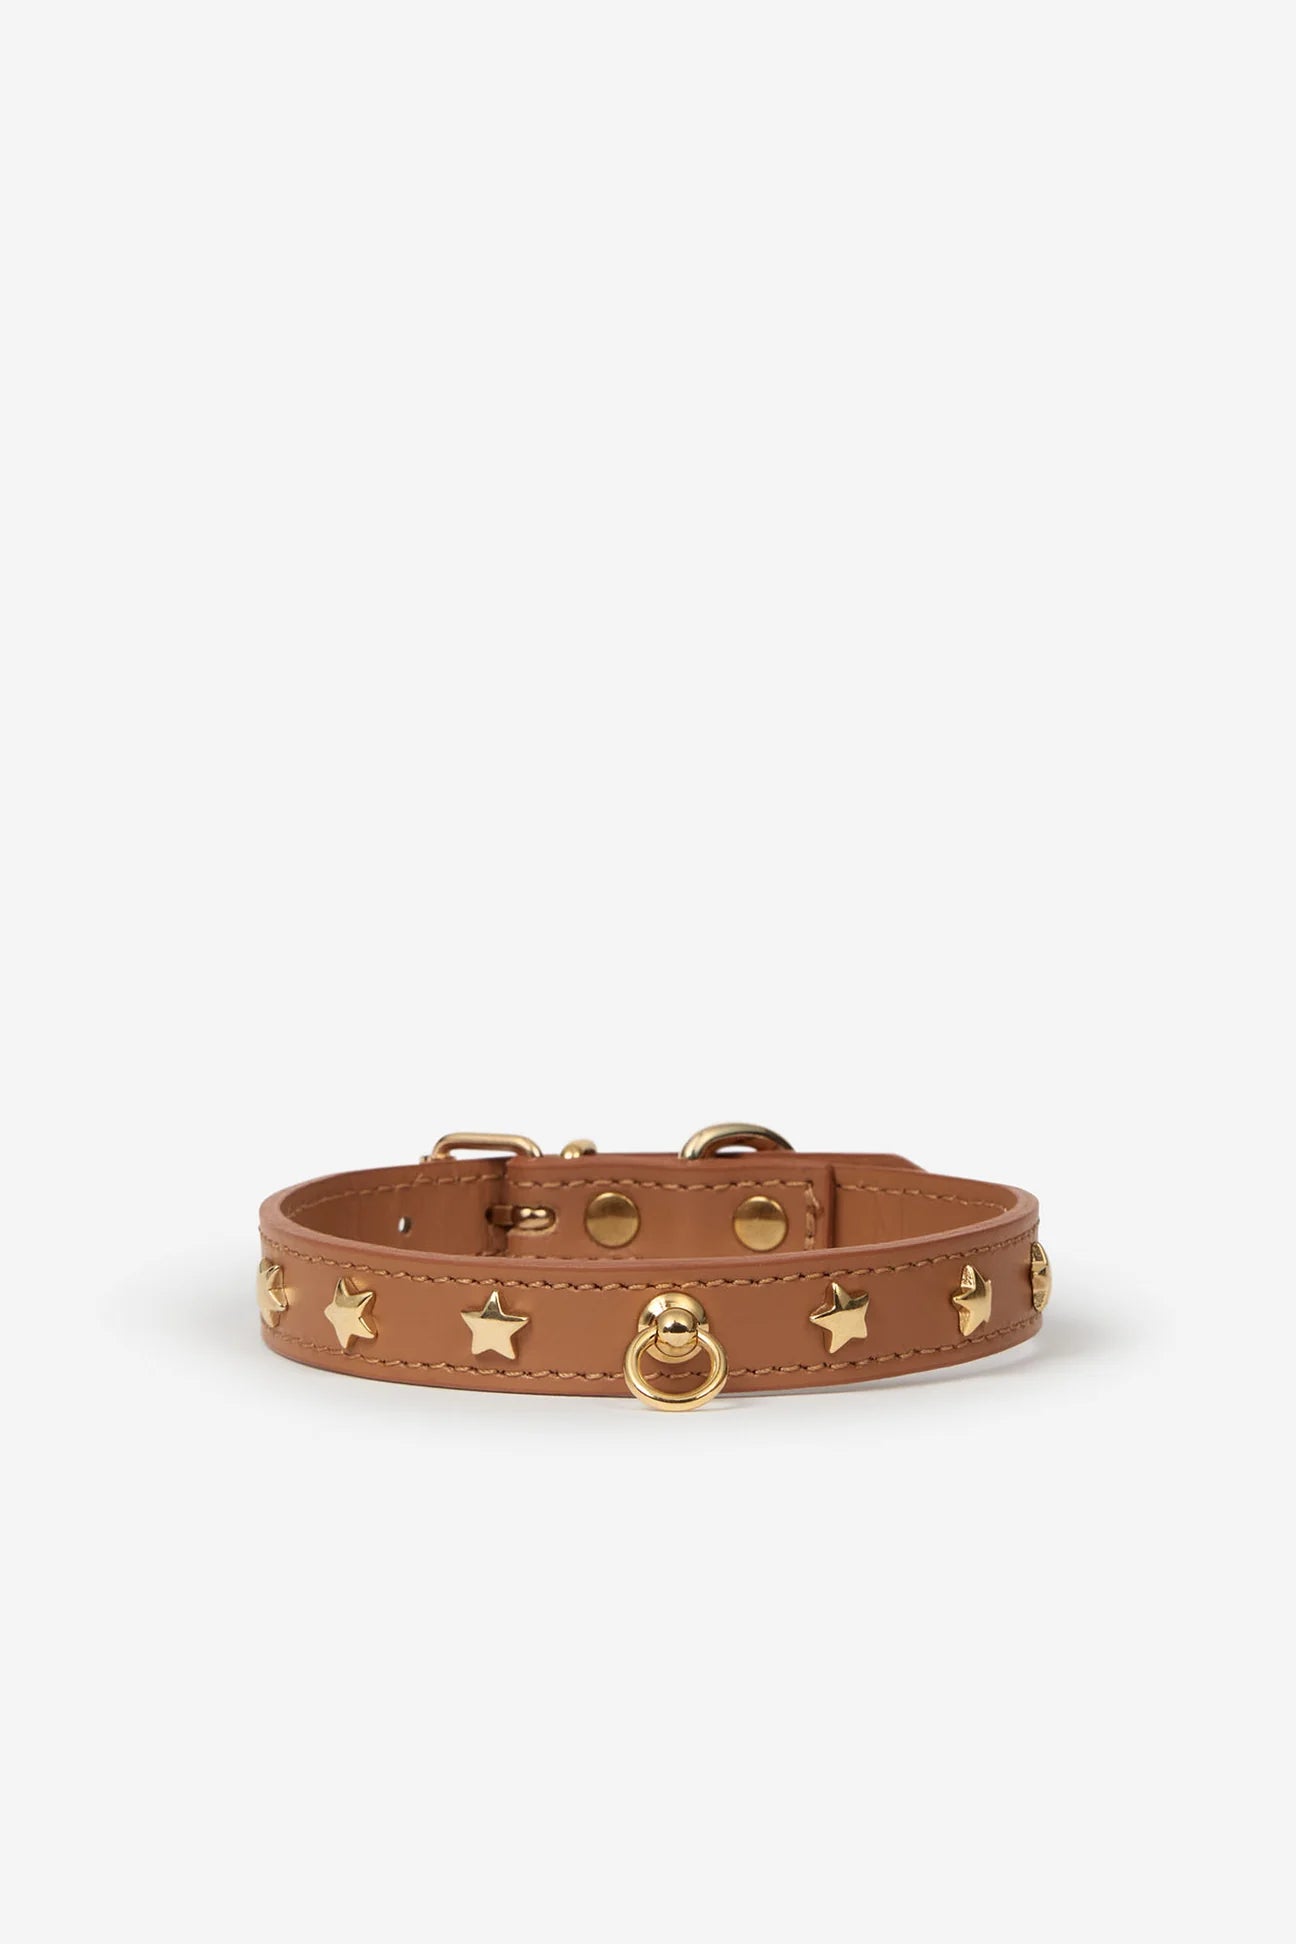 Brown leather dog collar with golden studs